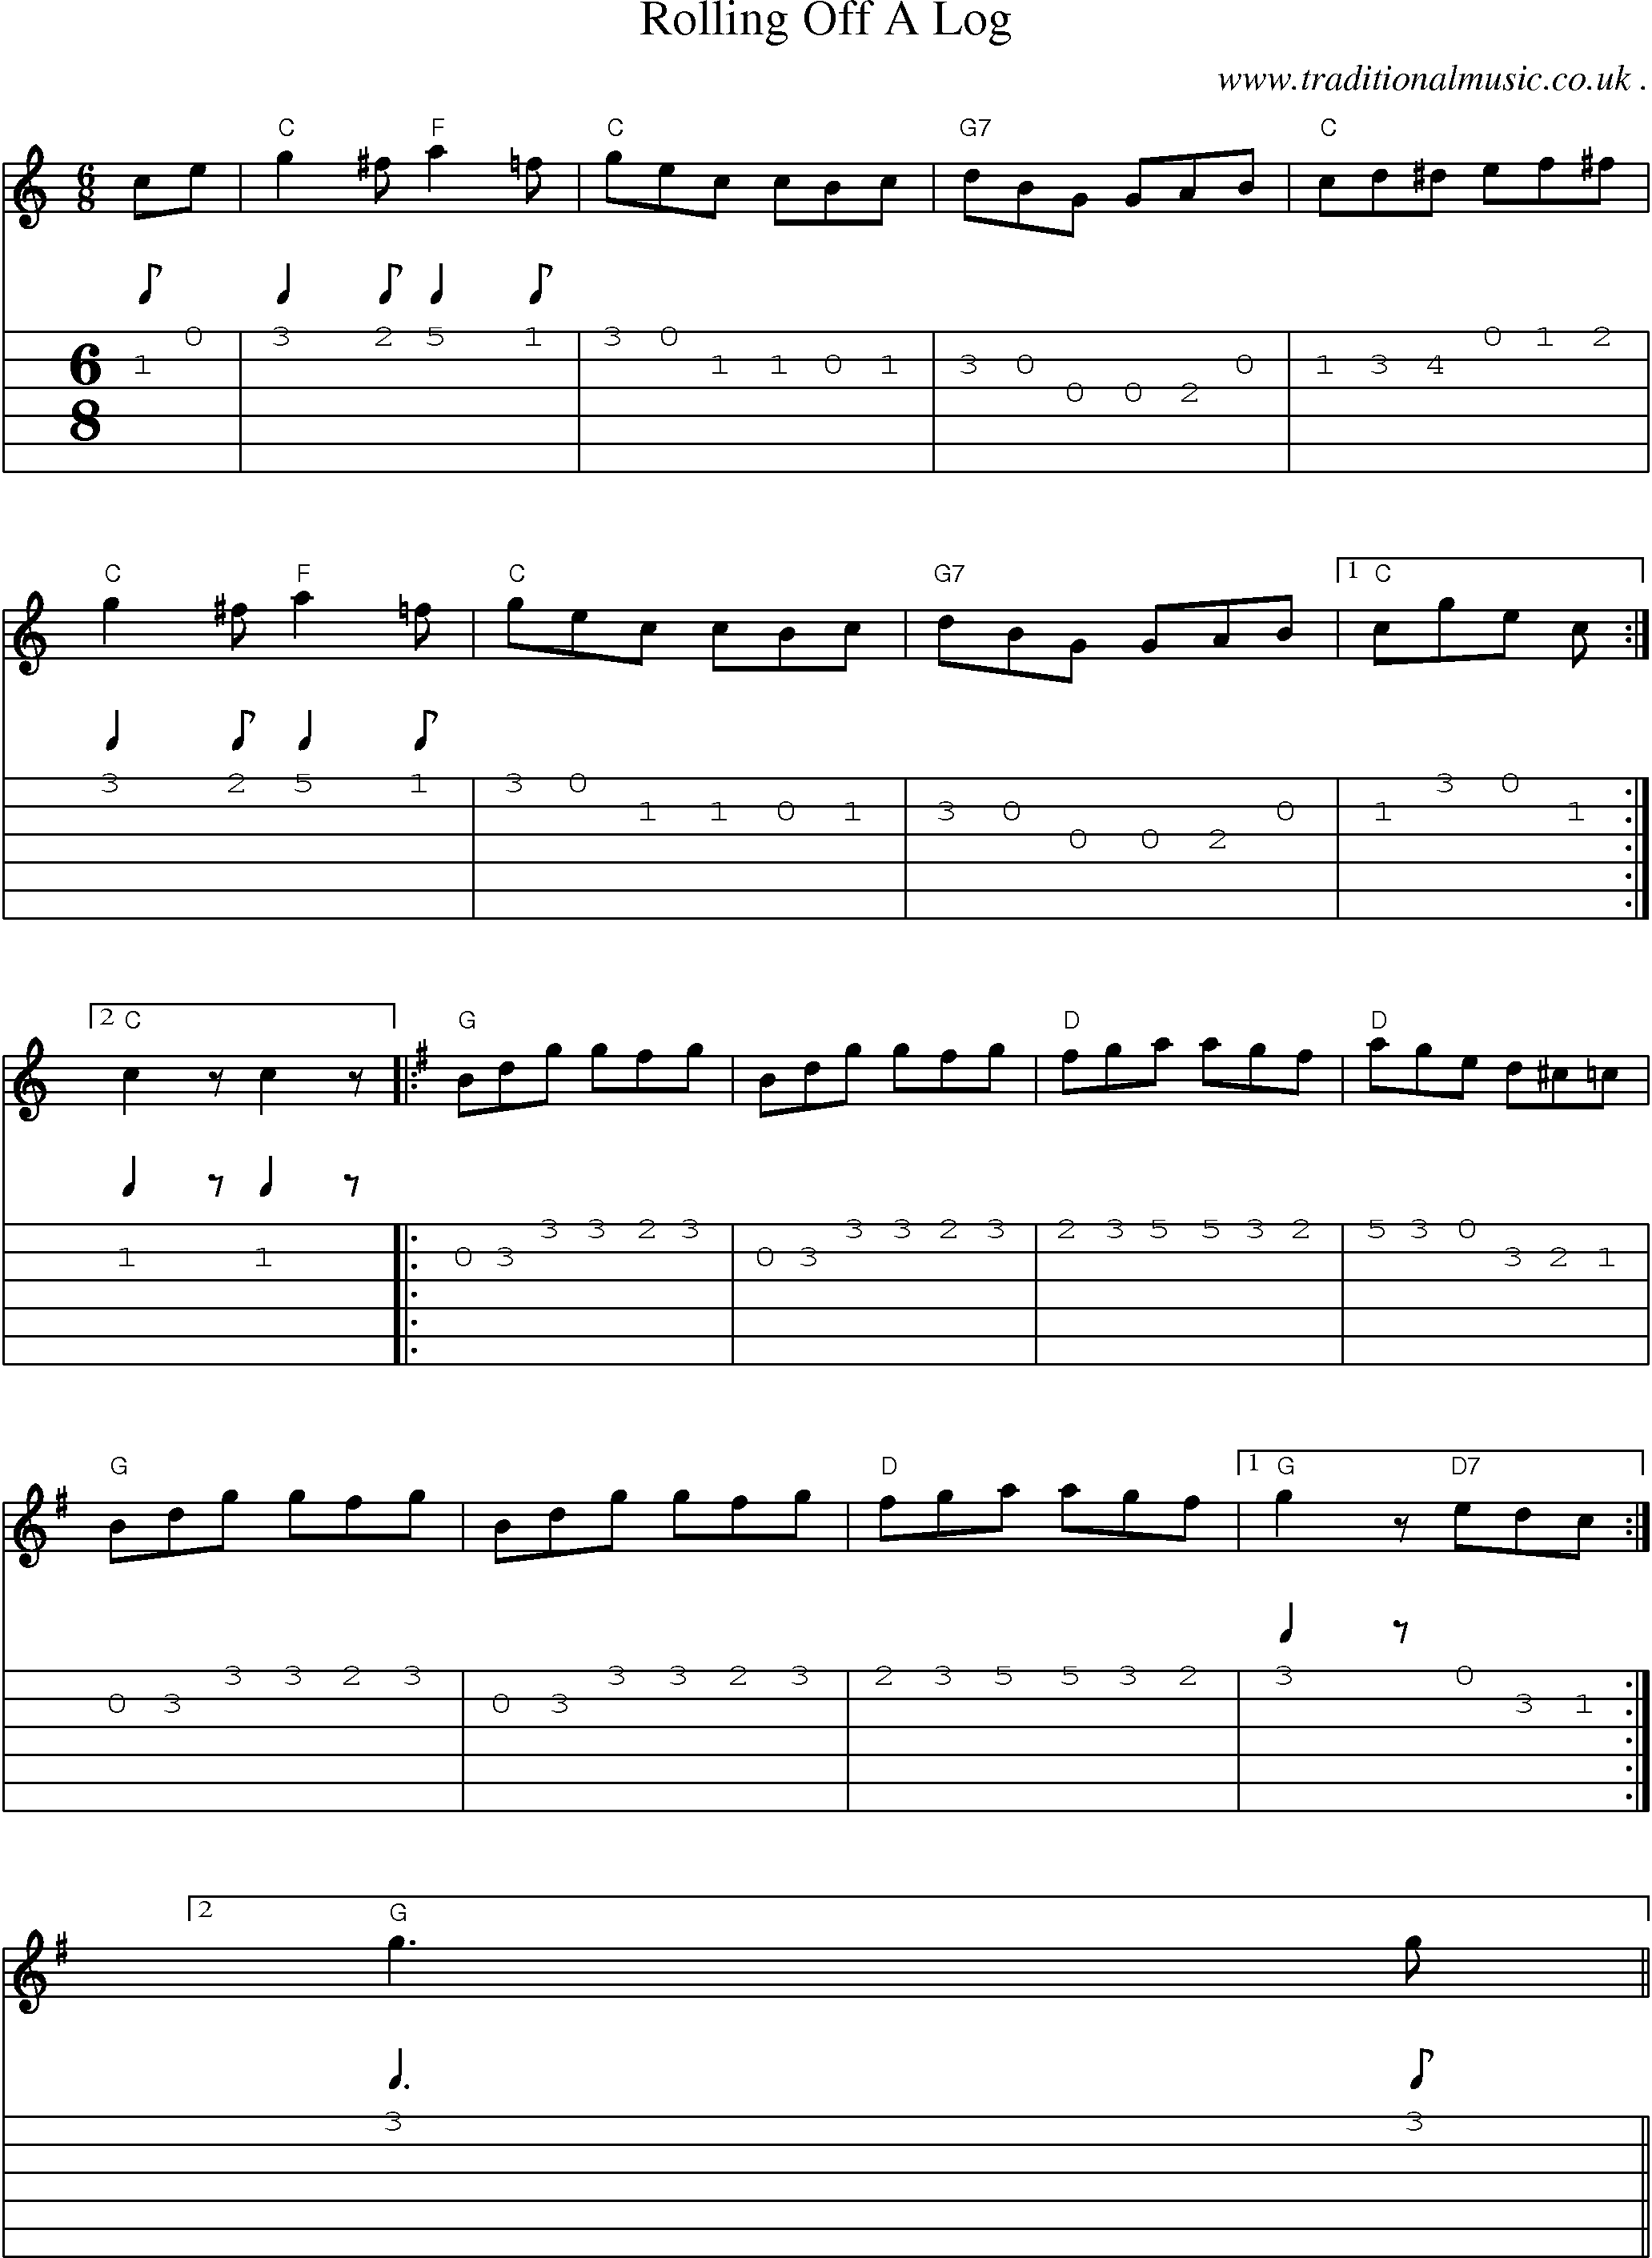 Sheet-Music and Guitar Tabs for Rolling Off A Log